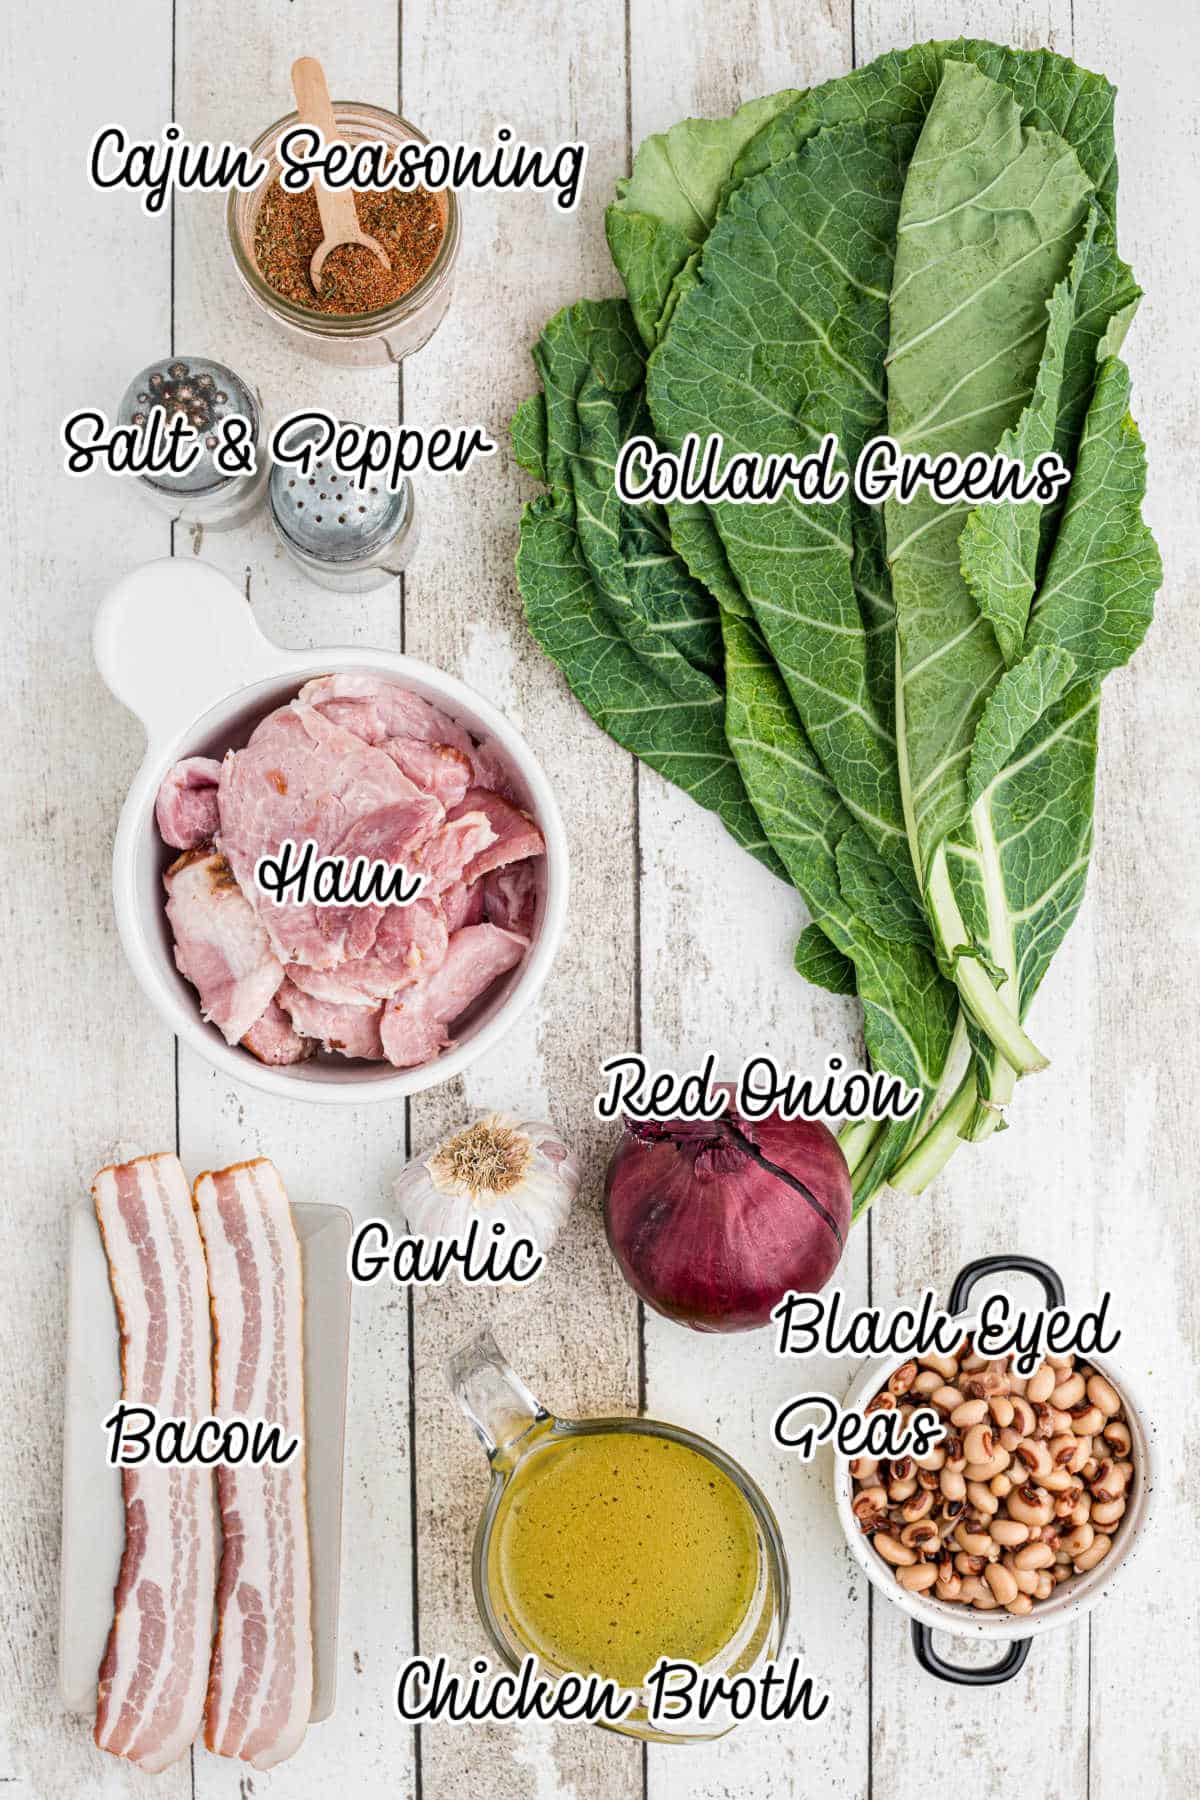 Ingredients laid out showing what would be needed to make a Southern Black Eyed Peas and Collard Greens Recipe.